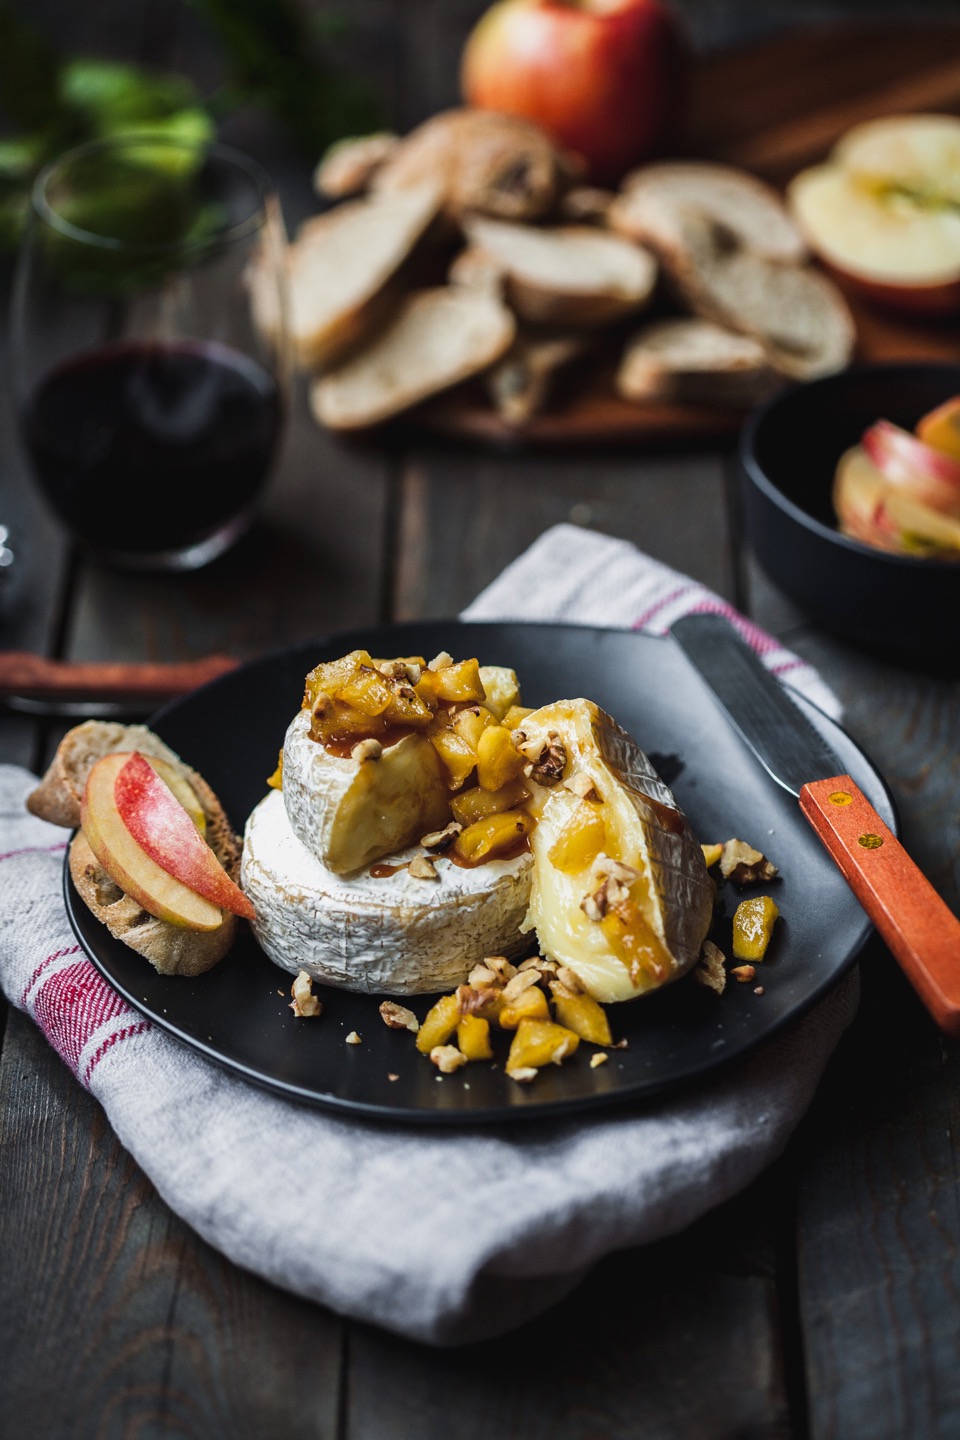 Baked Brie With Caramelized Apples